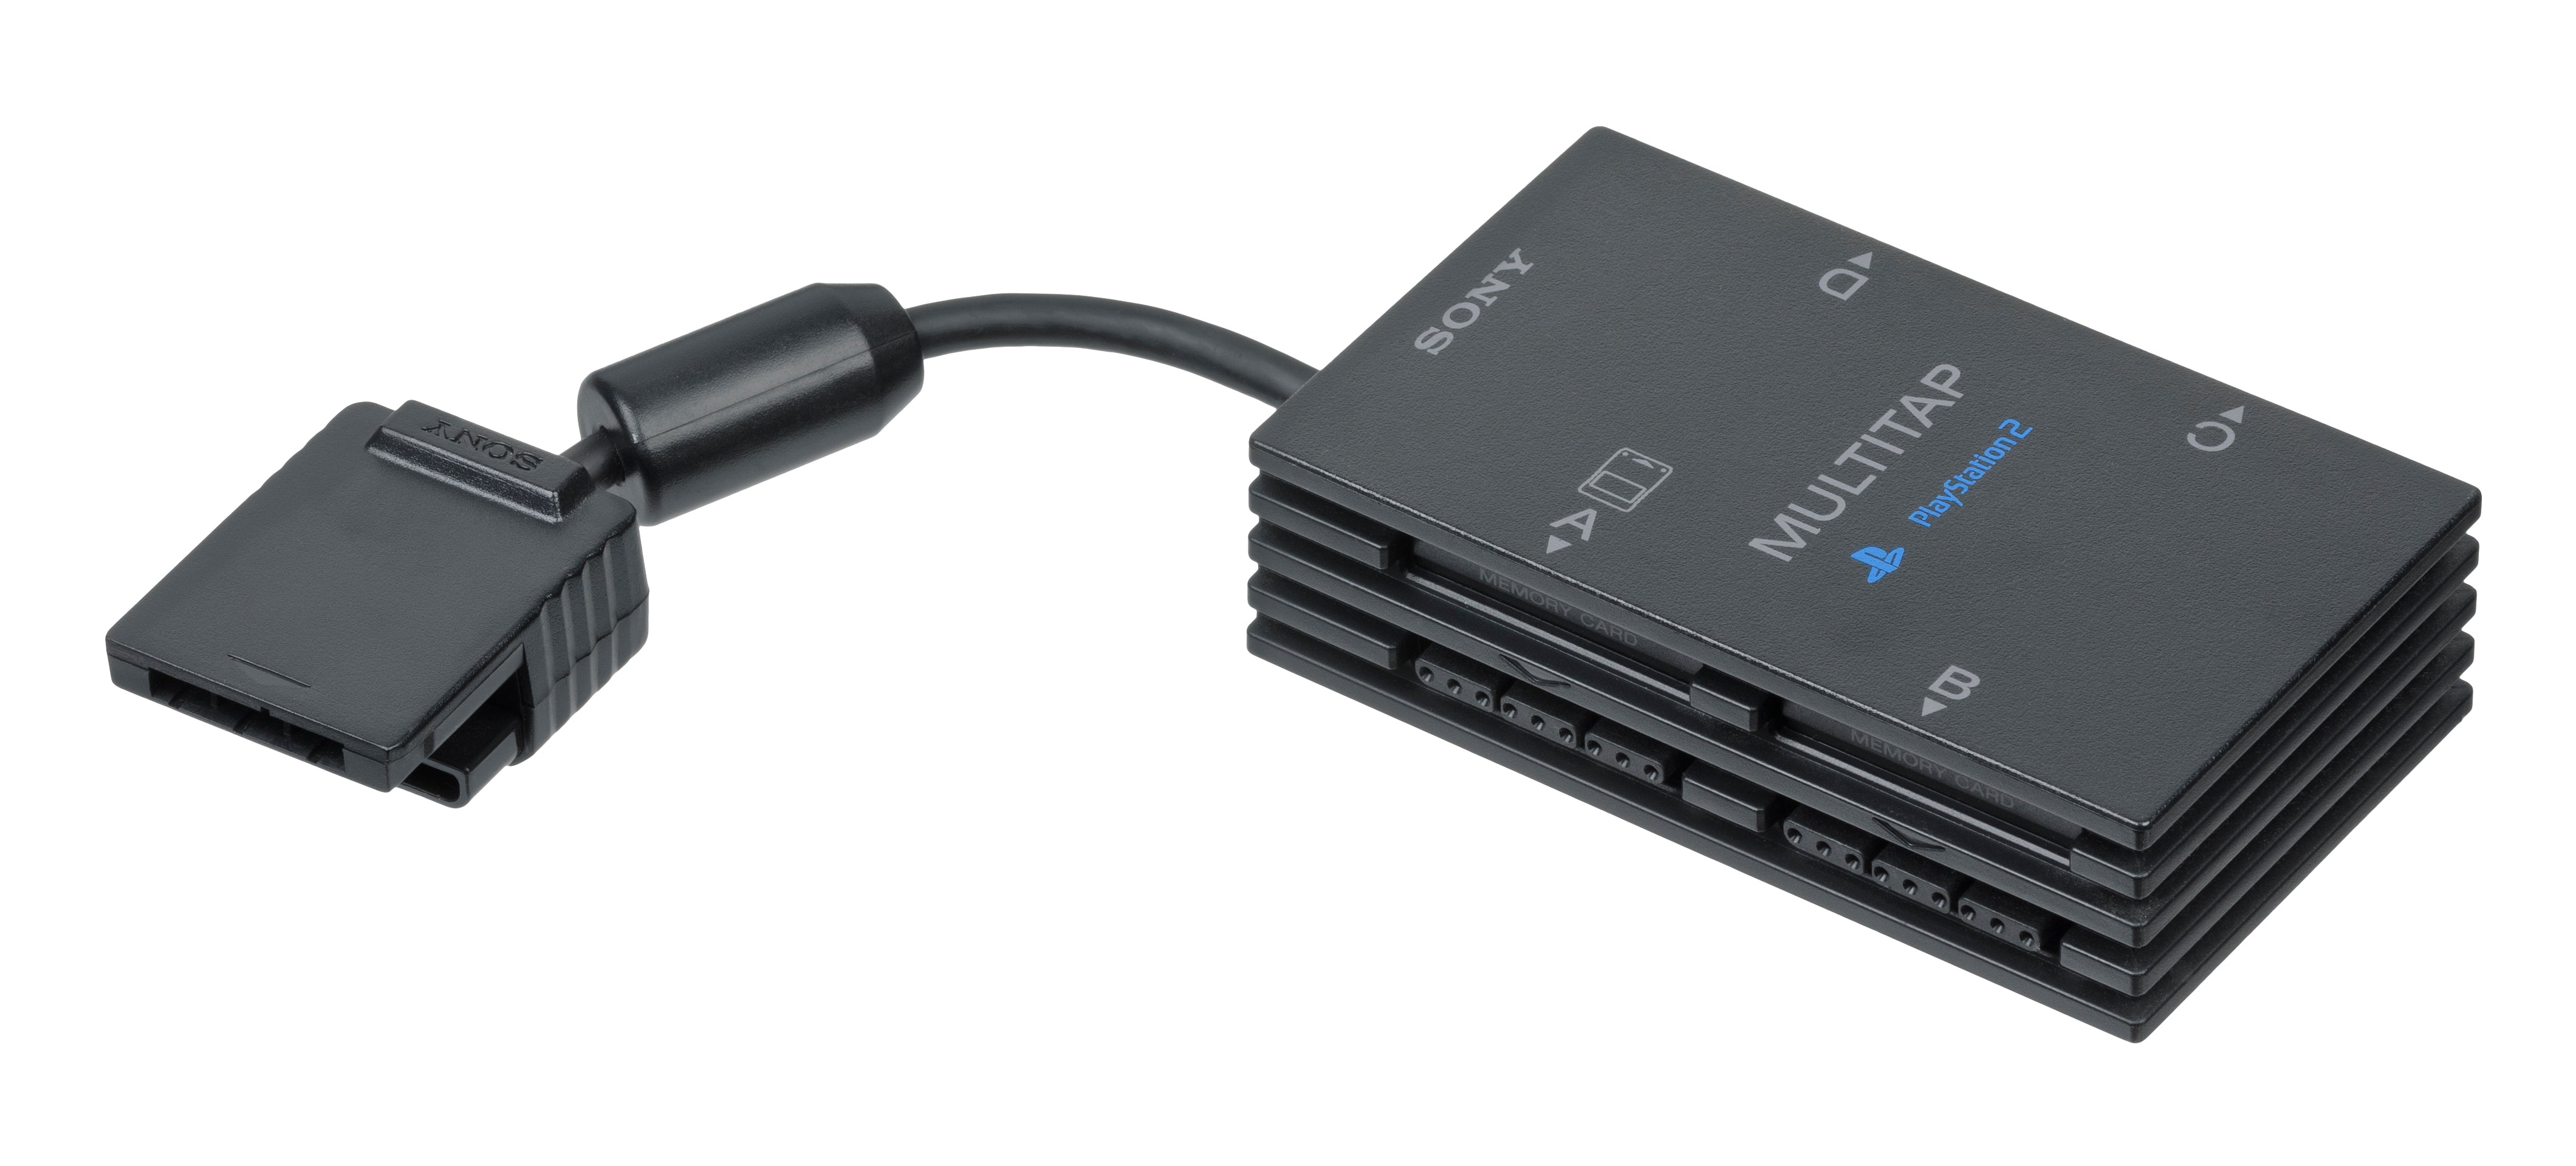 Sony Playstation 2 PS2 Multitap Multi Player Adapter (SCPH-10090)